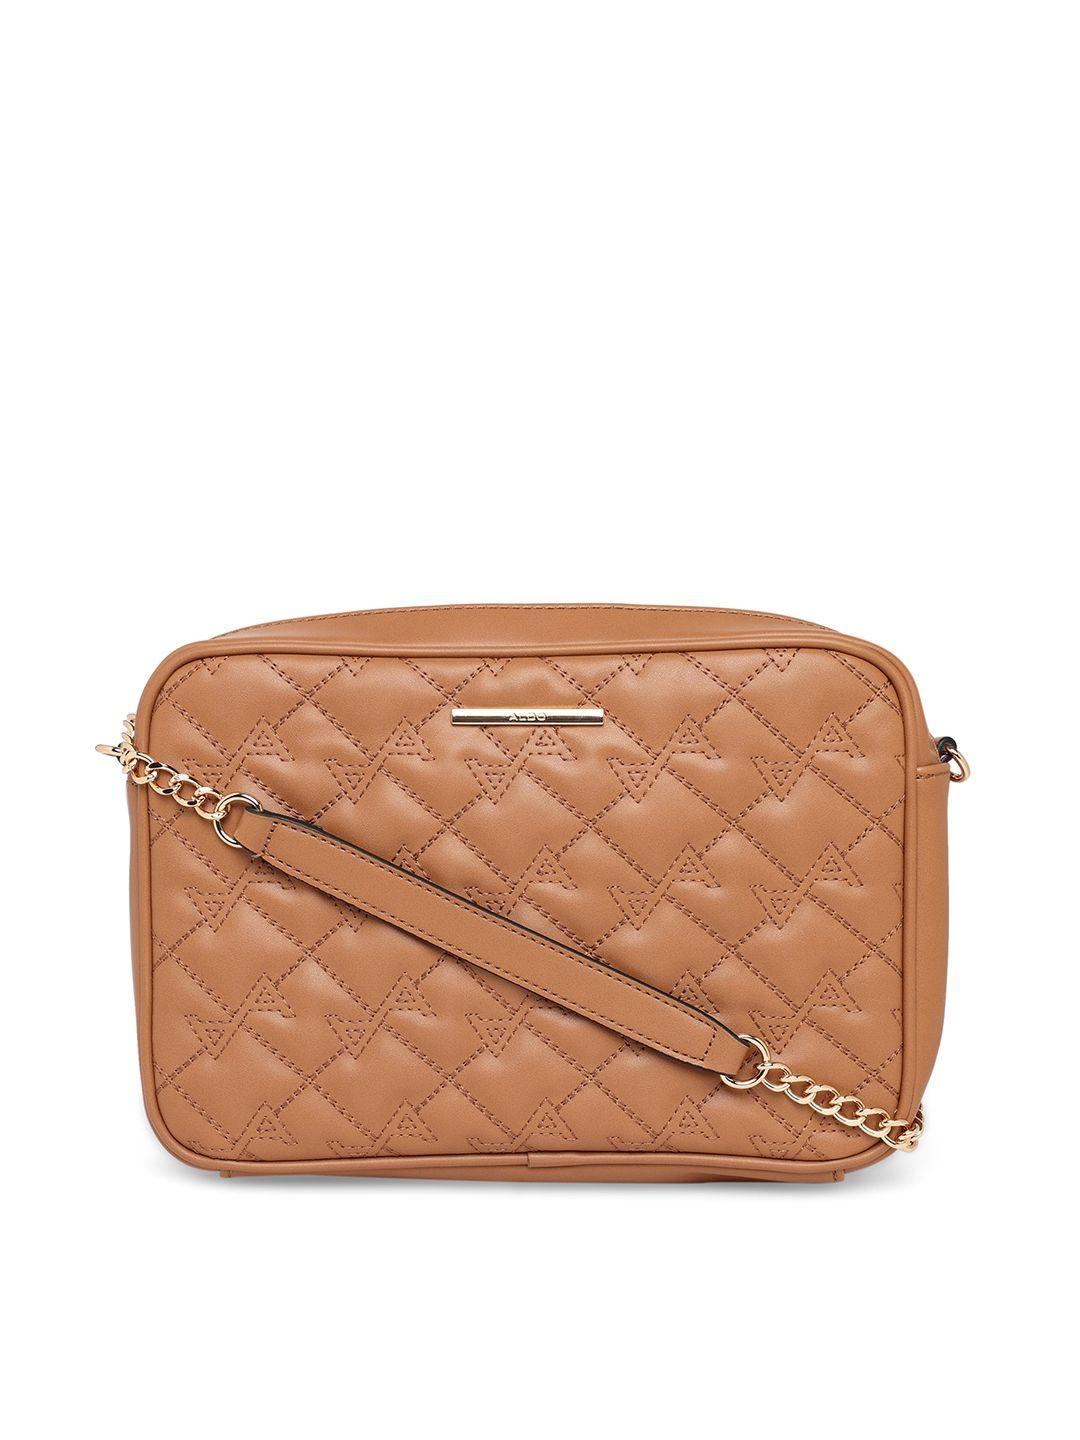 aldo textured quilted structured sling bag